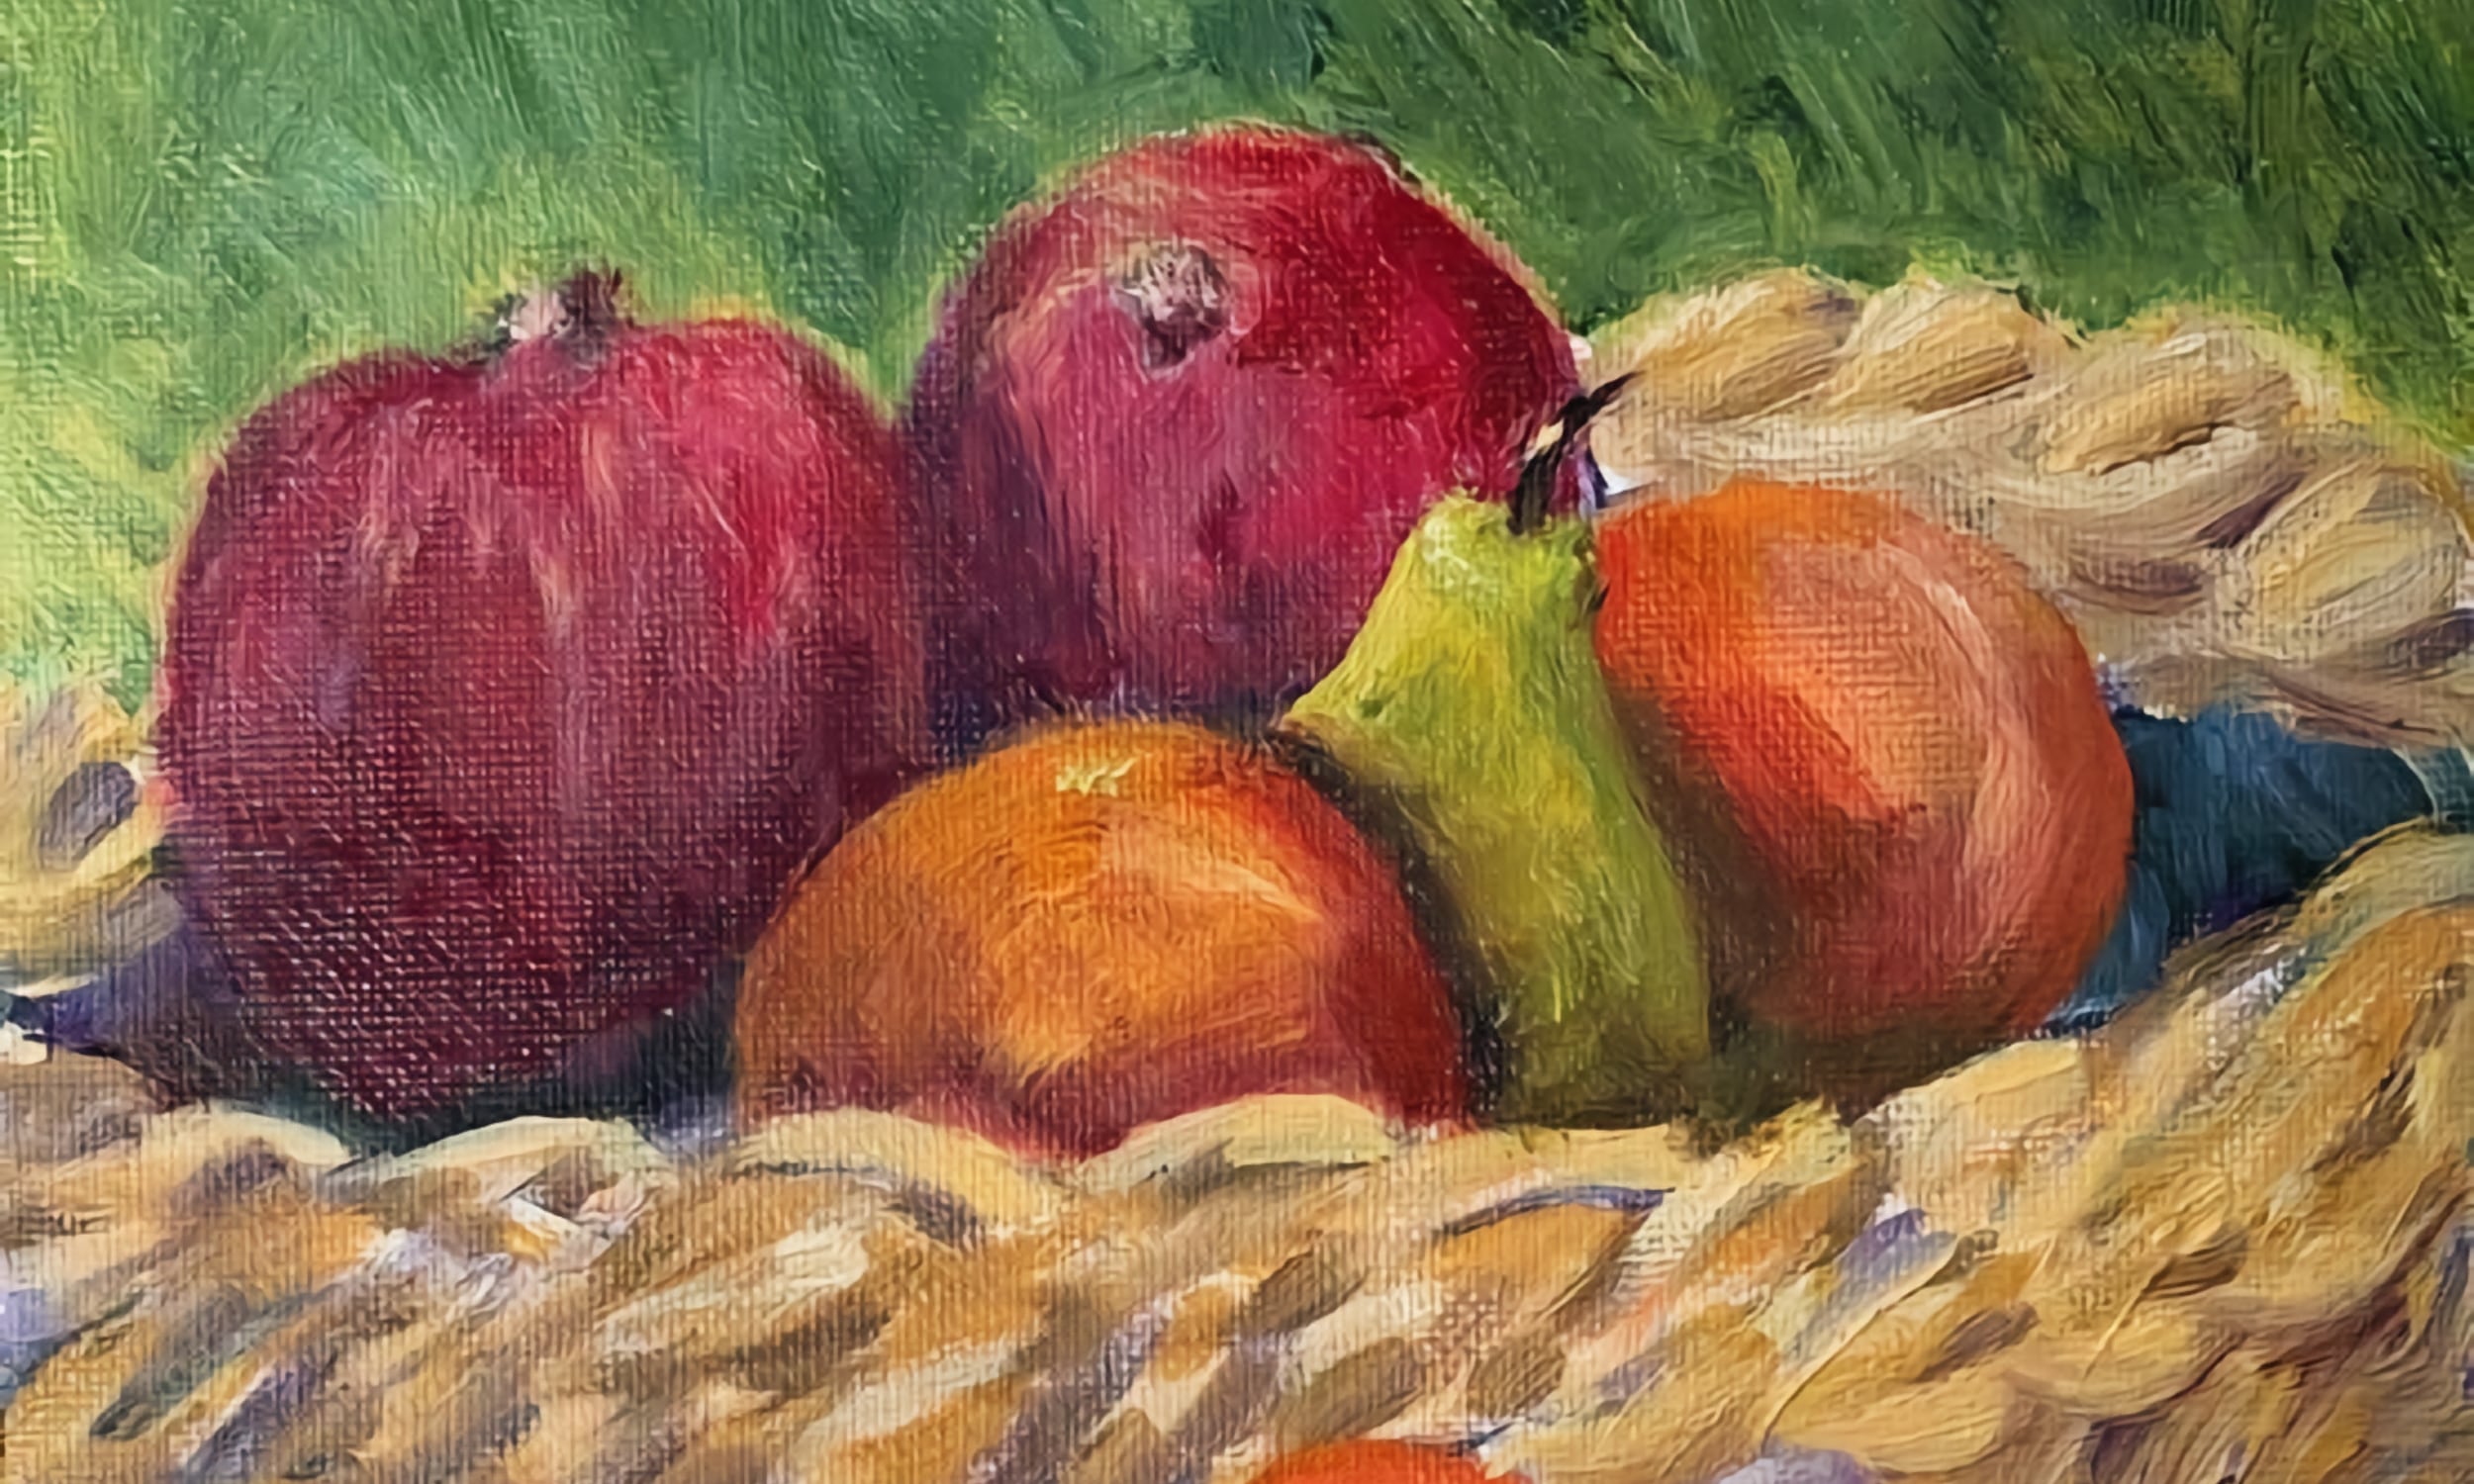 A painting of a fruit basked from PaSTA gallery